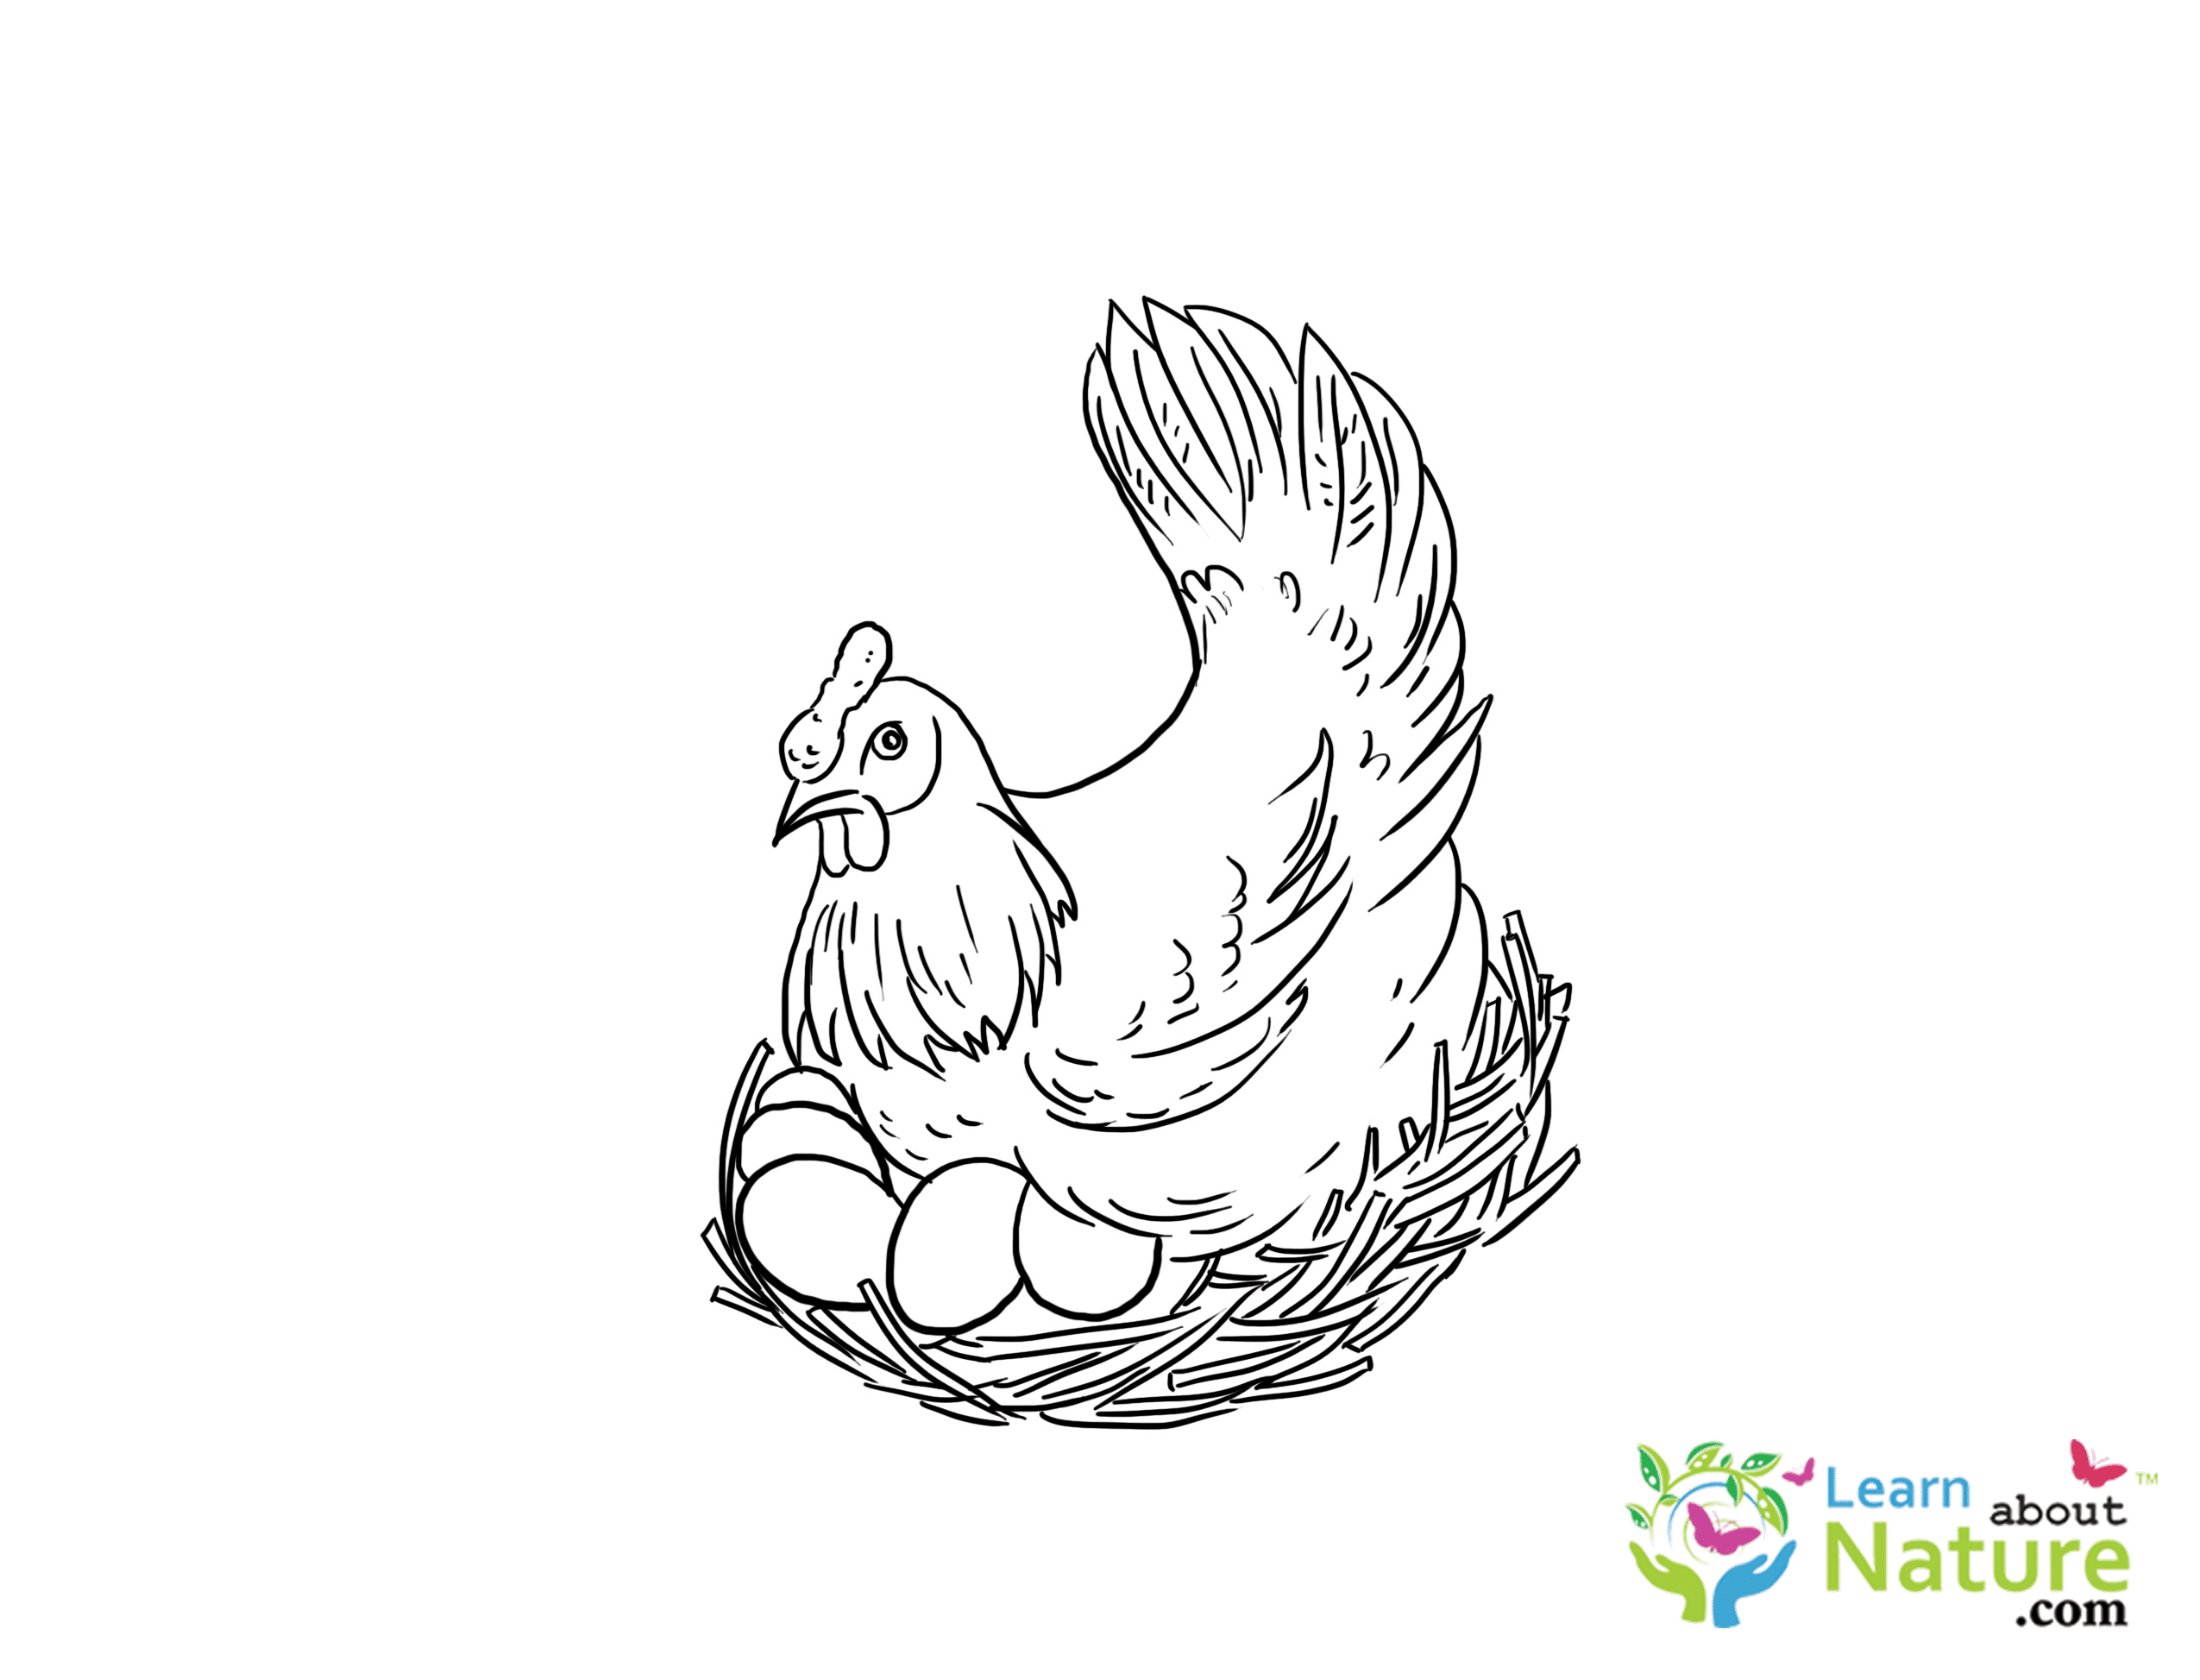 Hen with Eggs - Learn About Nature